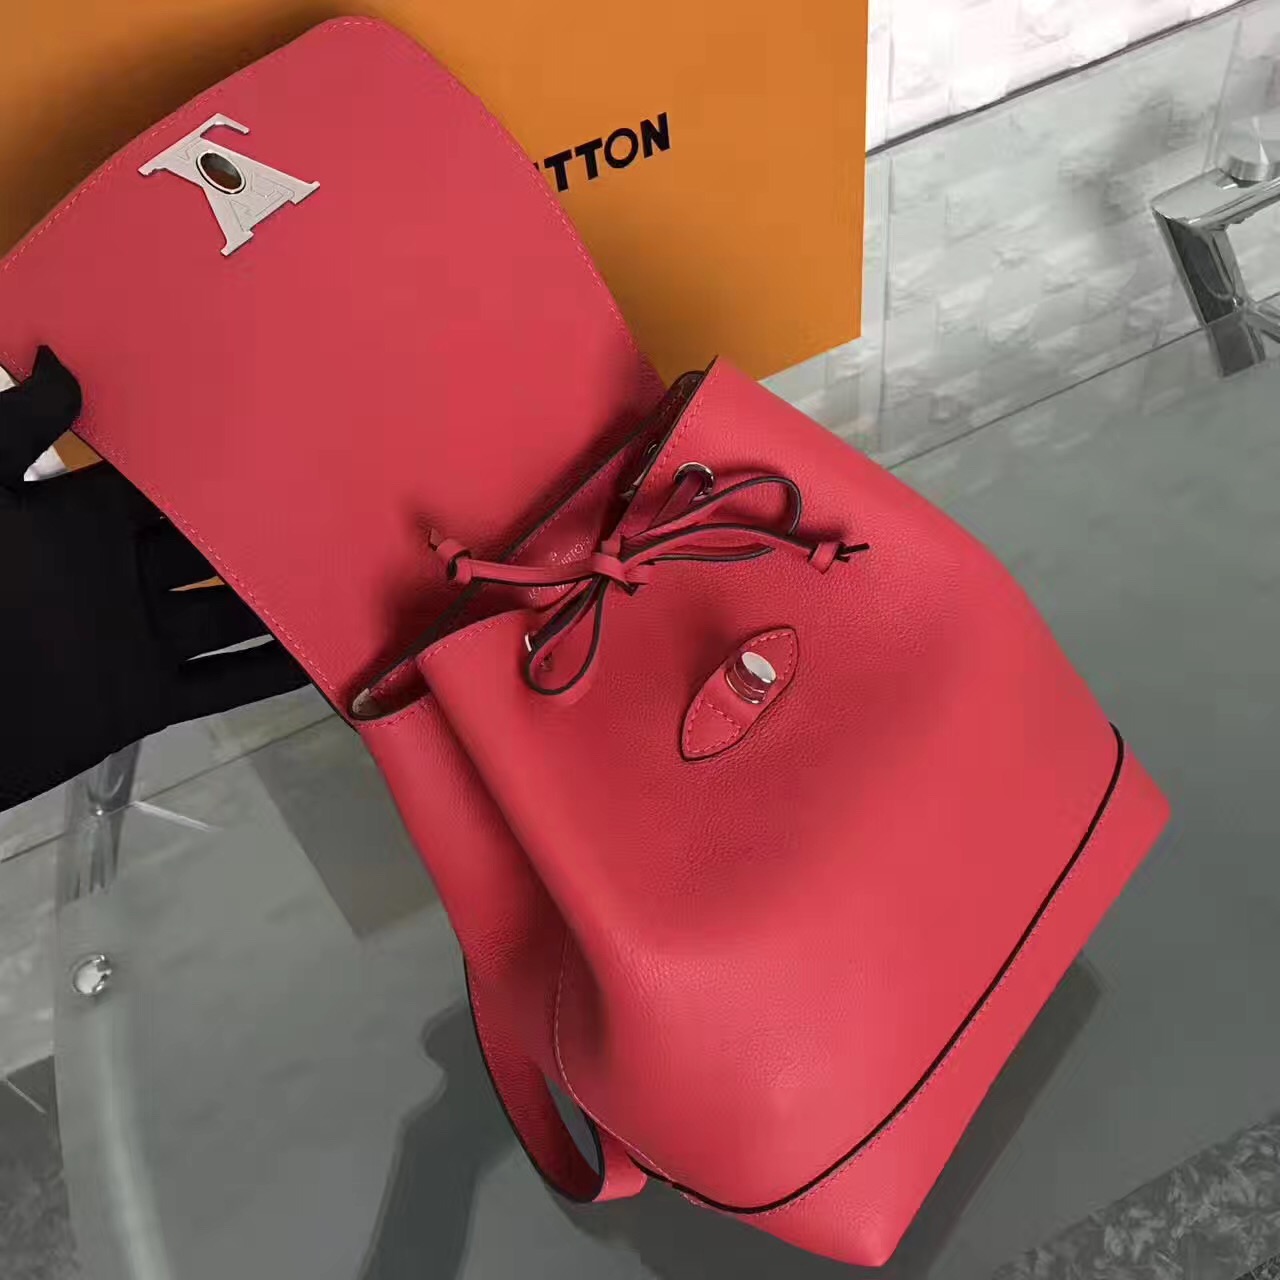 LV Louis Vuitton backpack small leather red handbags